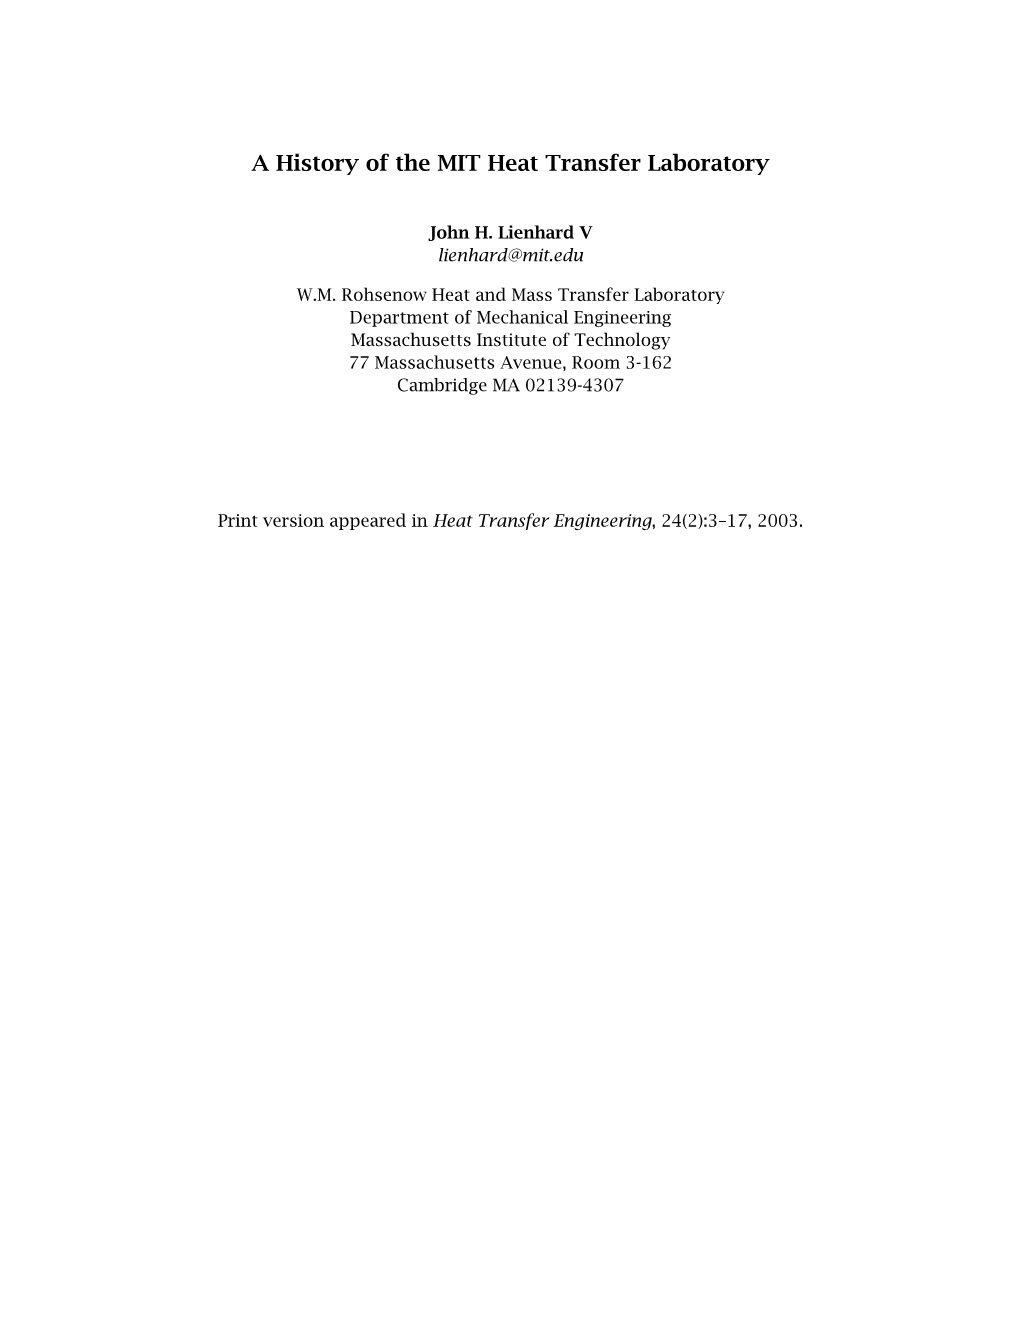 A History of the MIT Heat Transfer Laboratory